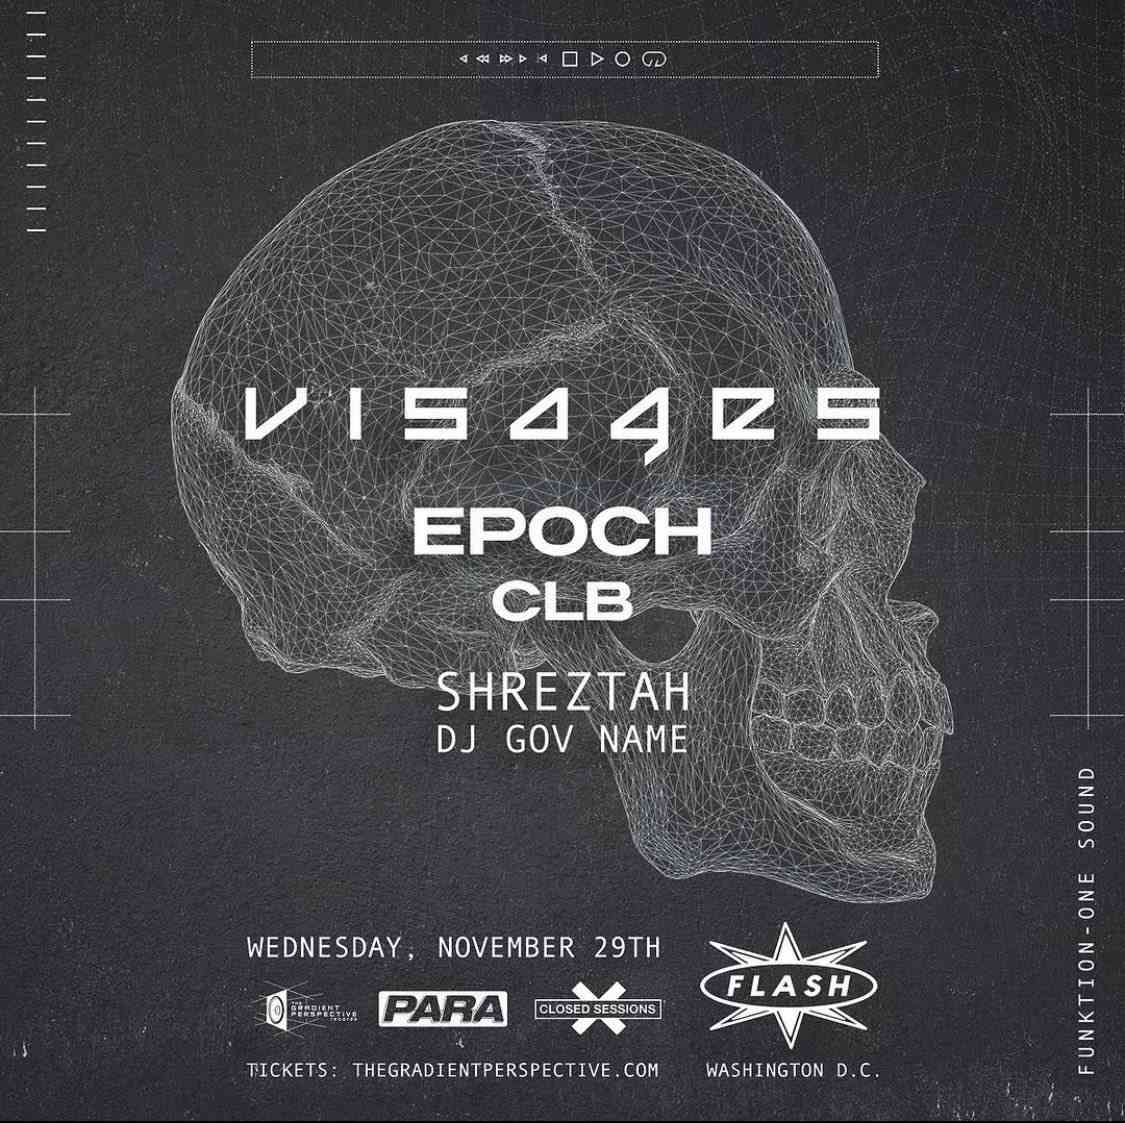 Event image for PARA PRESENTS, THE GRADIENT PERSPECTIVE & CLOSED SESSIONS PRESENTS: Visages - Epoch